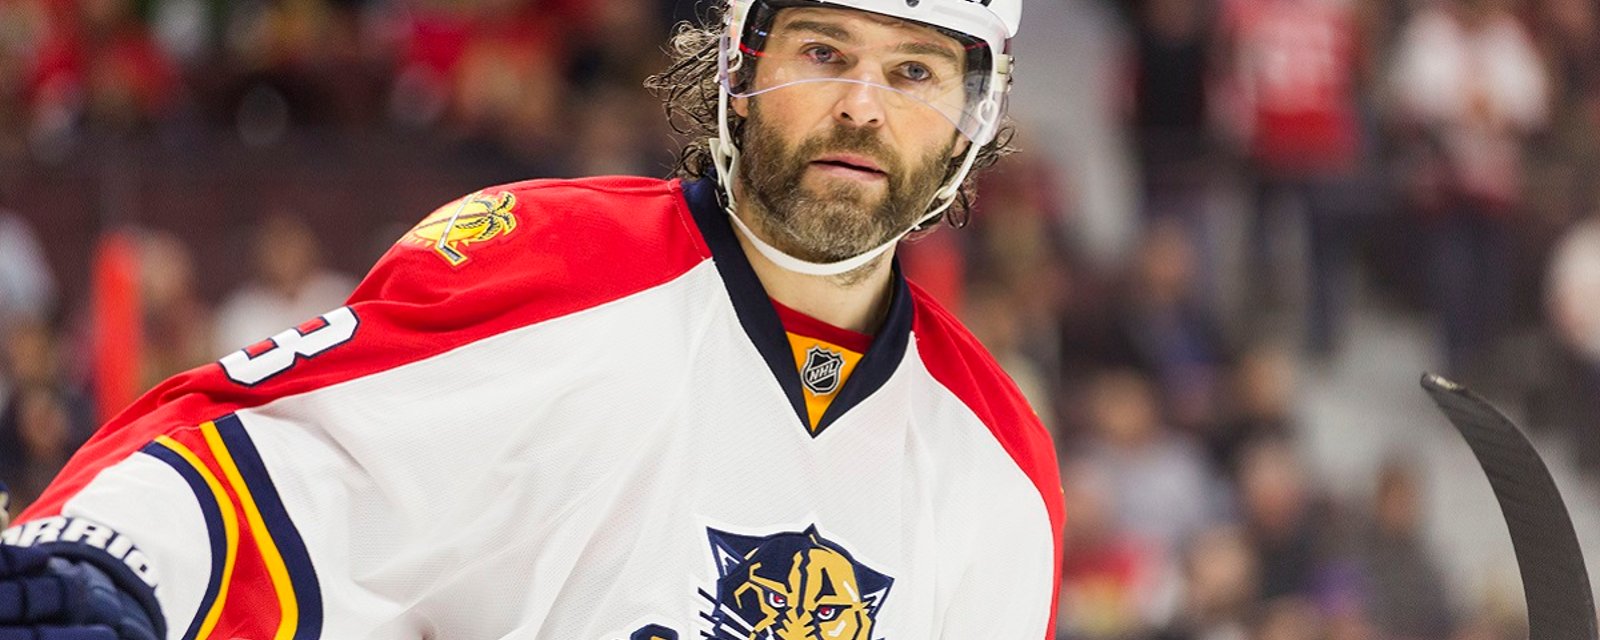 Huge update directly from Jaromir Jagr after today's rumors.